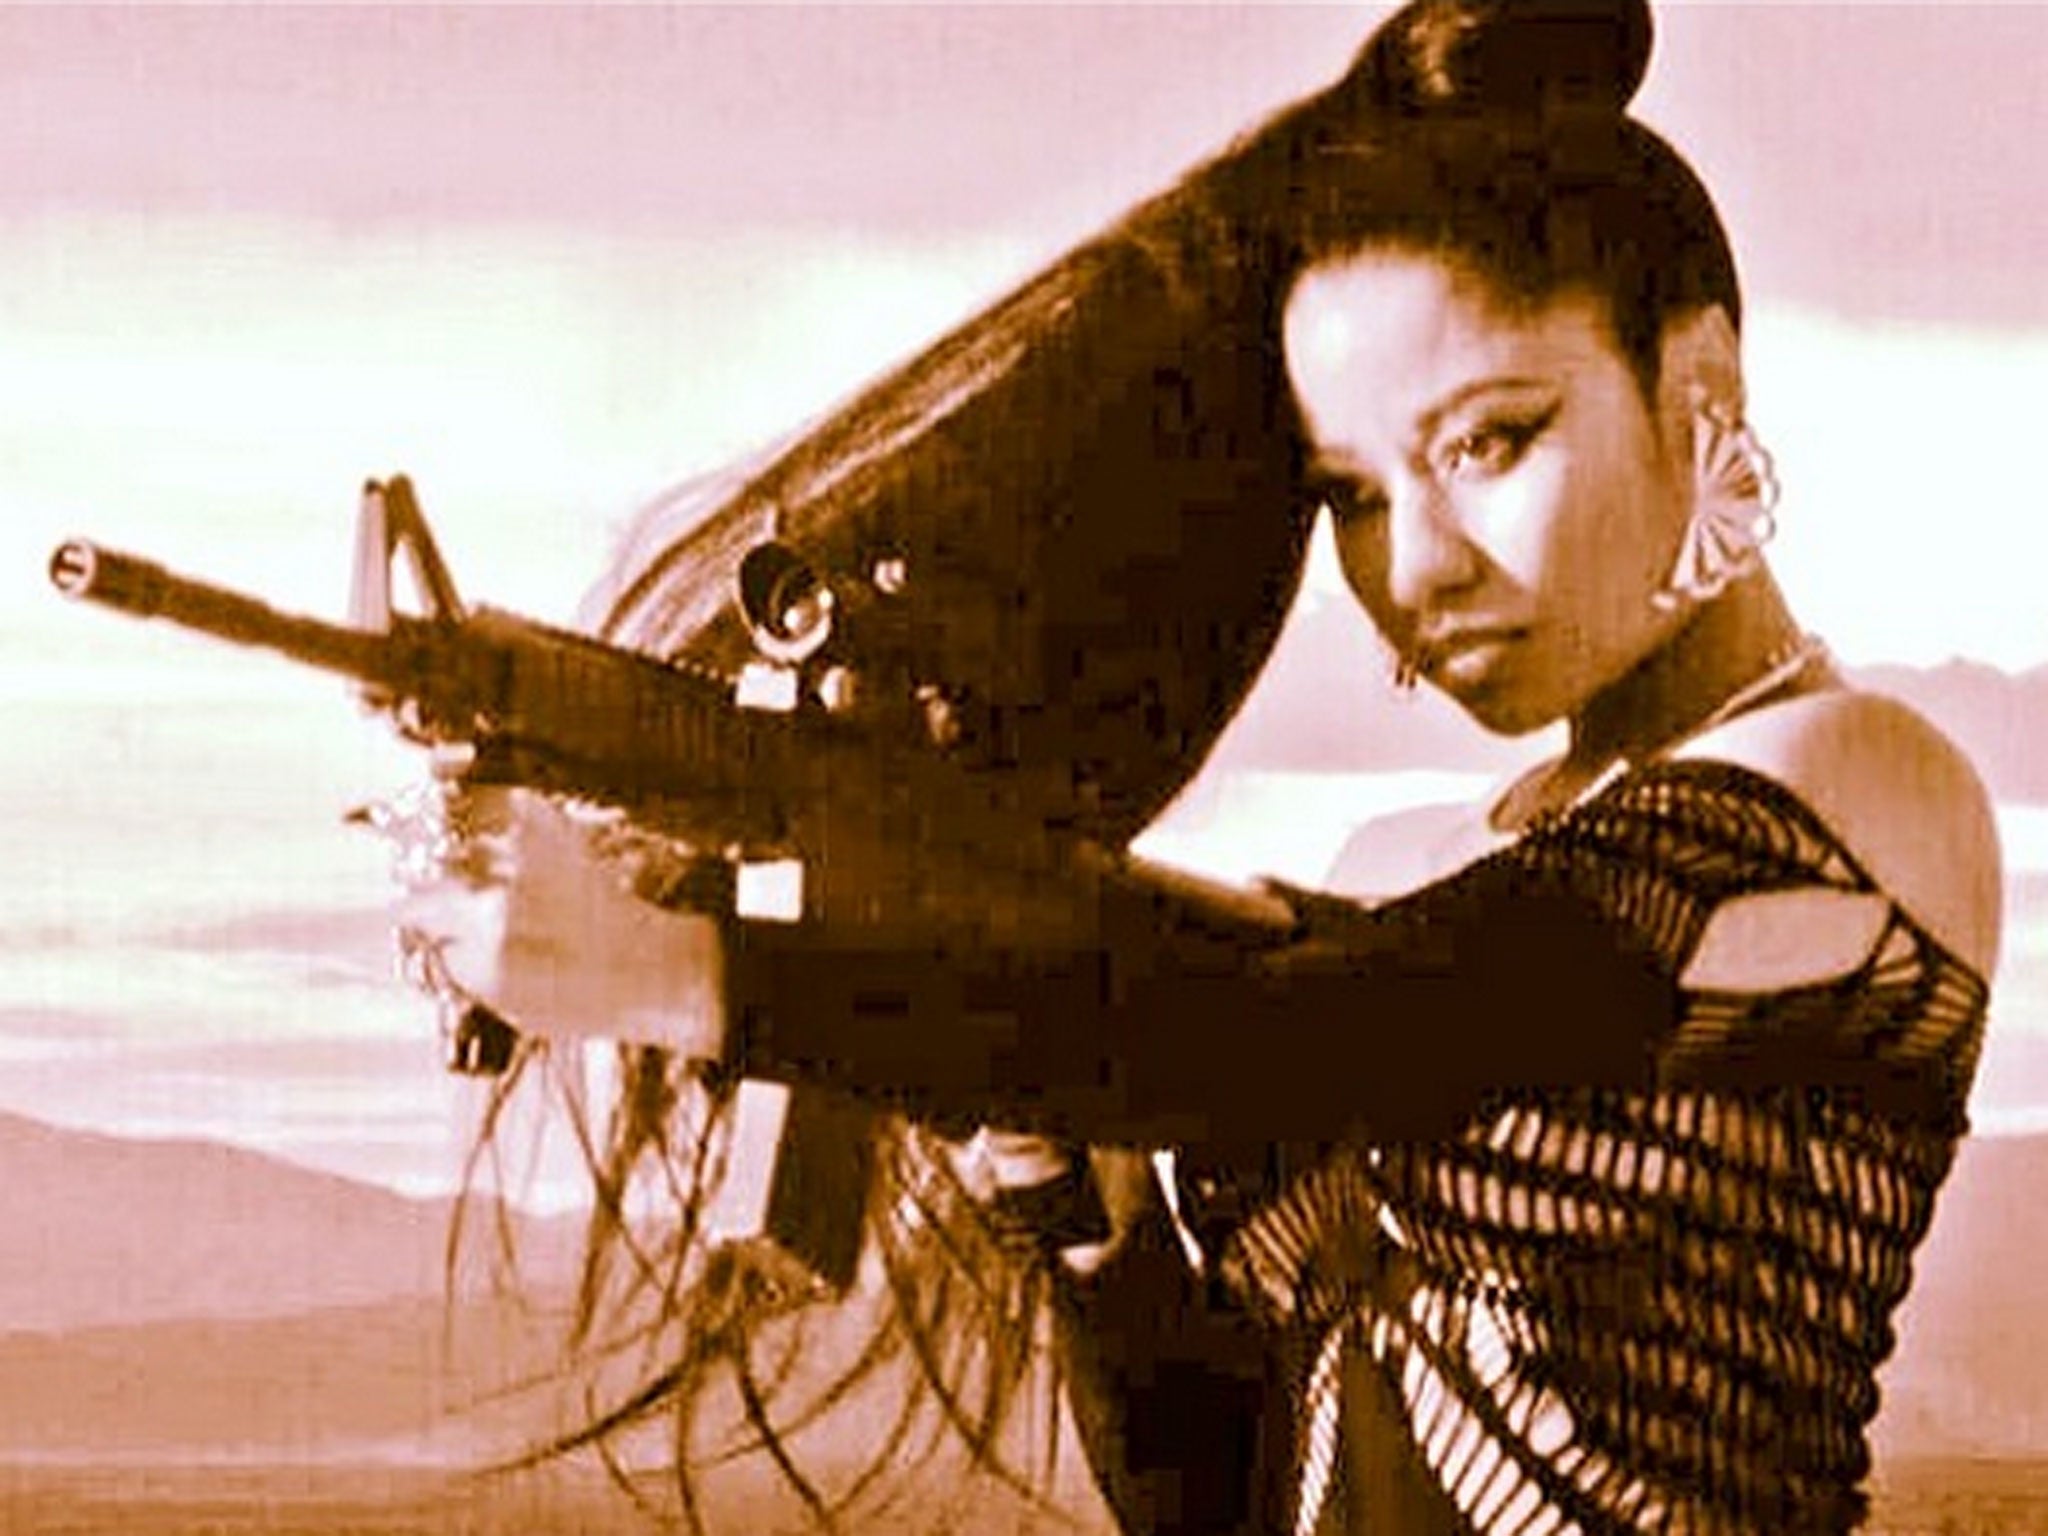 Nicki Minaj posted this still from her music video along with her Instagram 'apology'